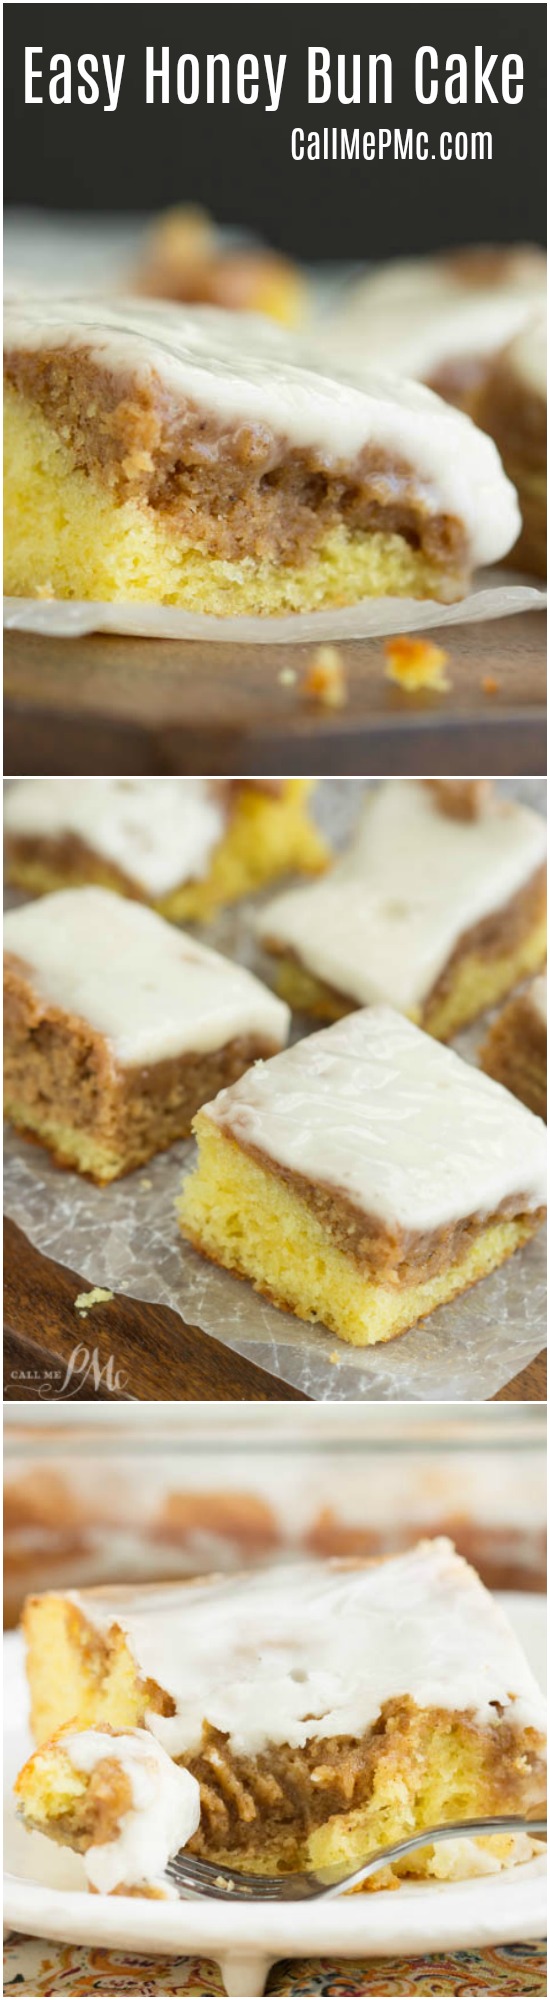 Honey Bun Cake is like a Cinnamon Roll in a cake form. Why is this important? Because it's SUPER easy to make. There's no waiting for yeast to rise and bread to proof. Just mix this easy cake that starts with a cake mix together and you're ready to bake!